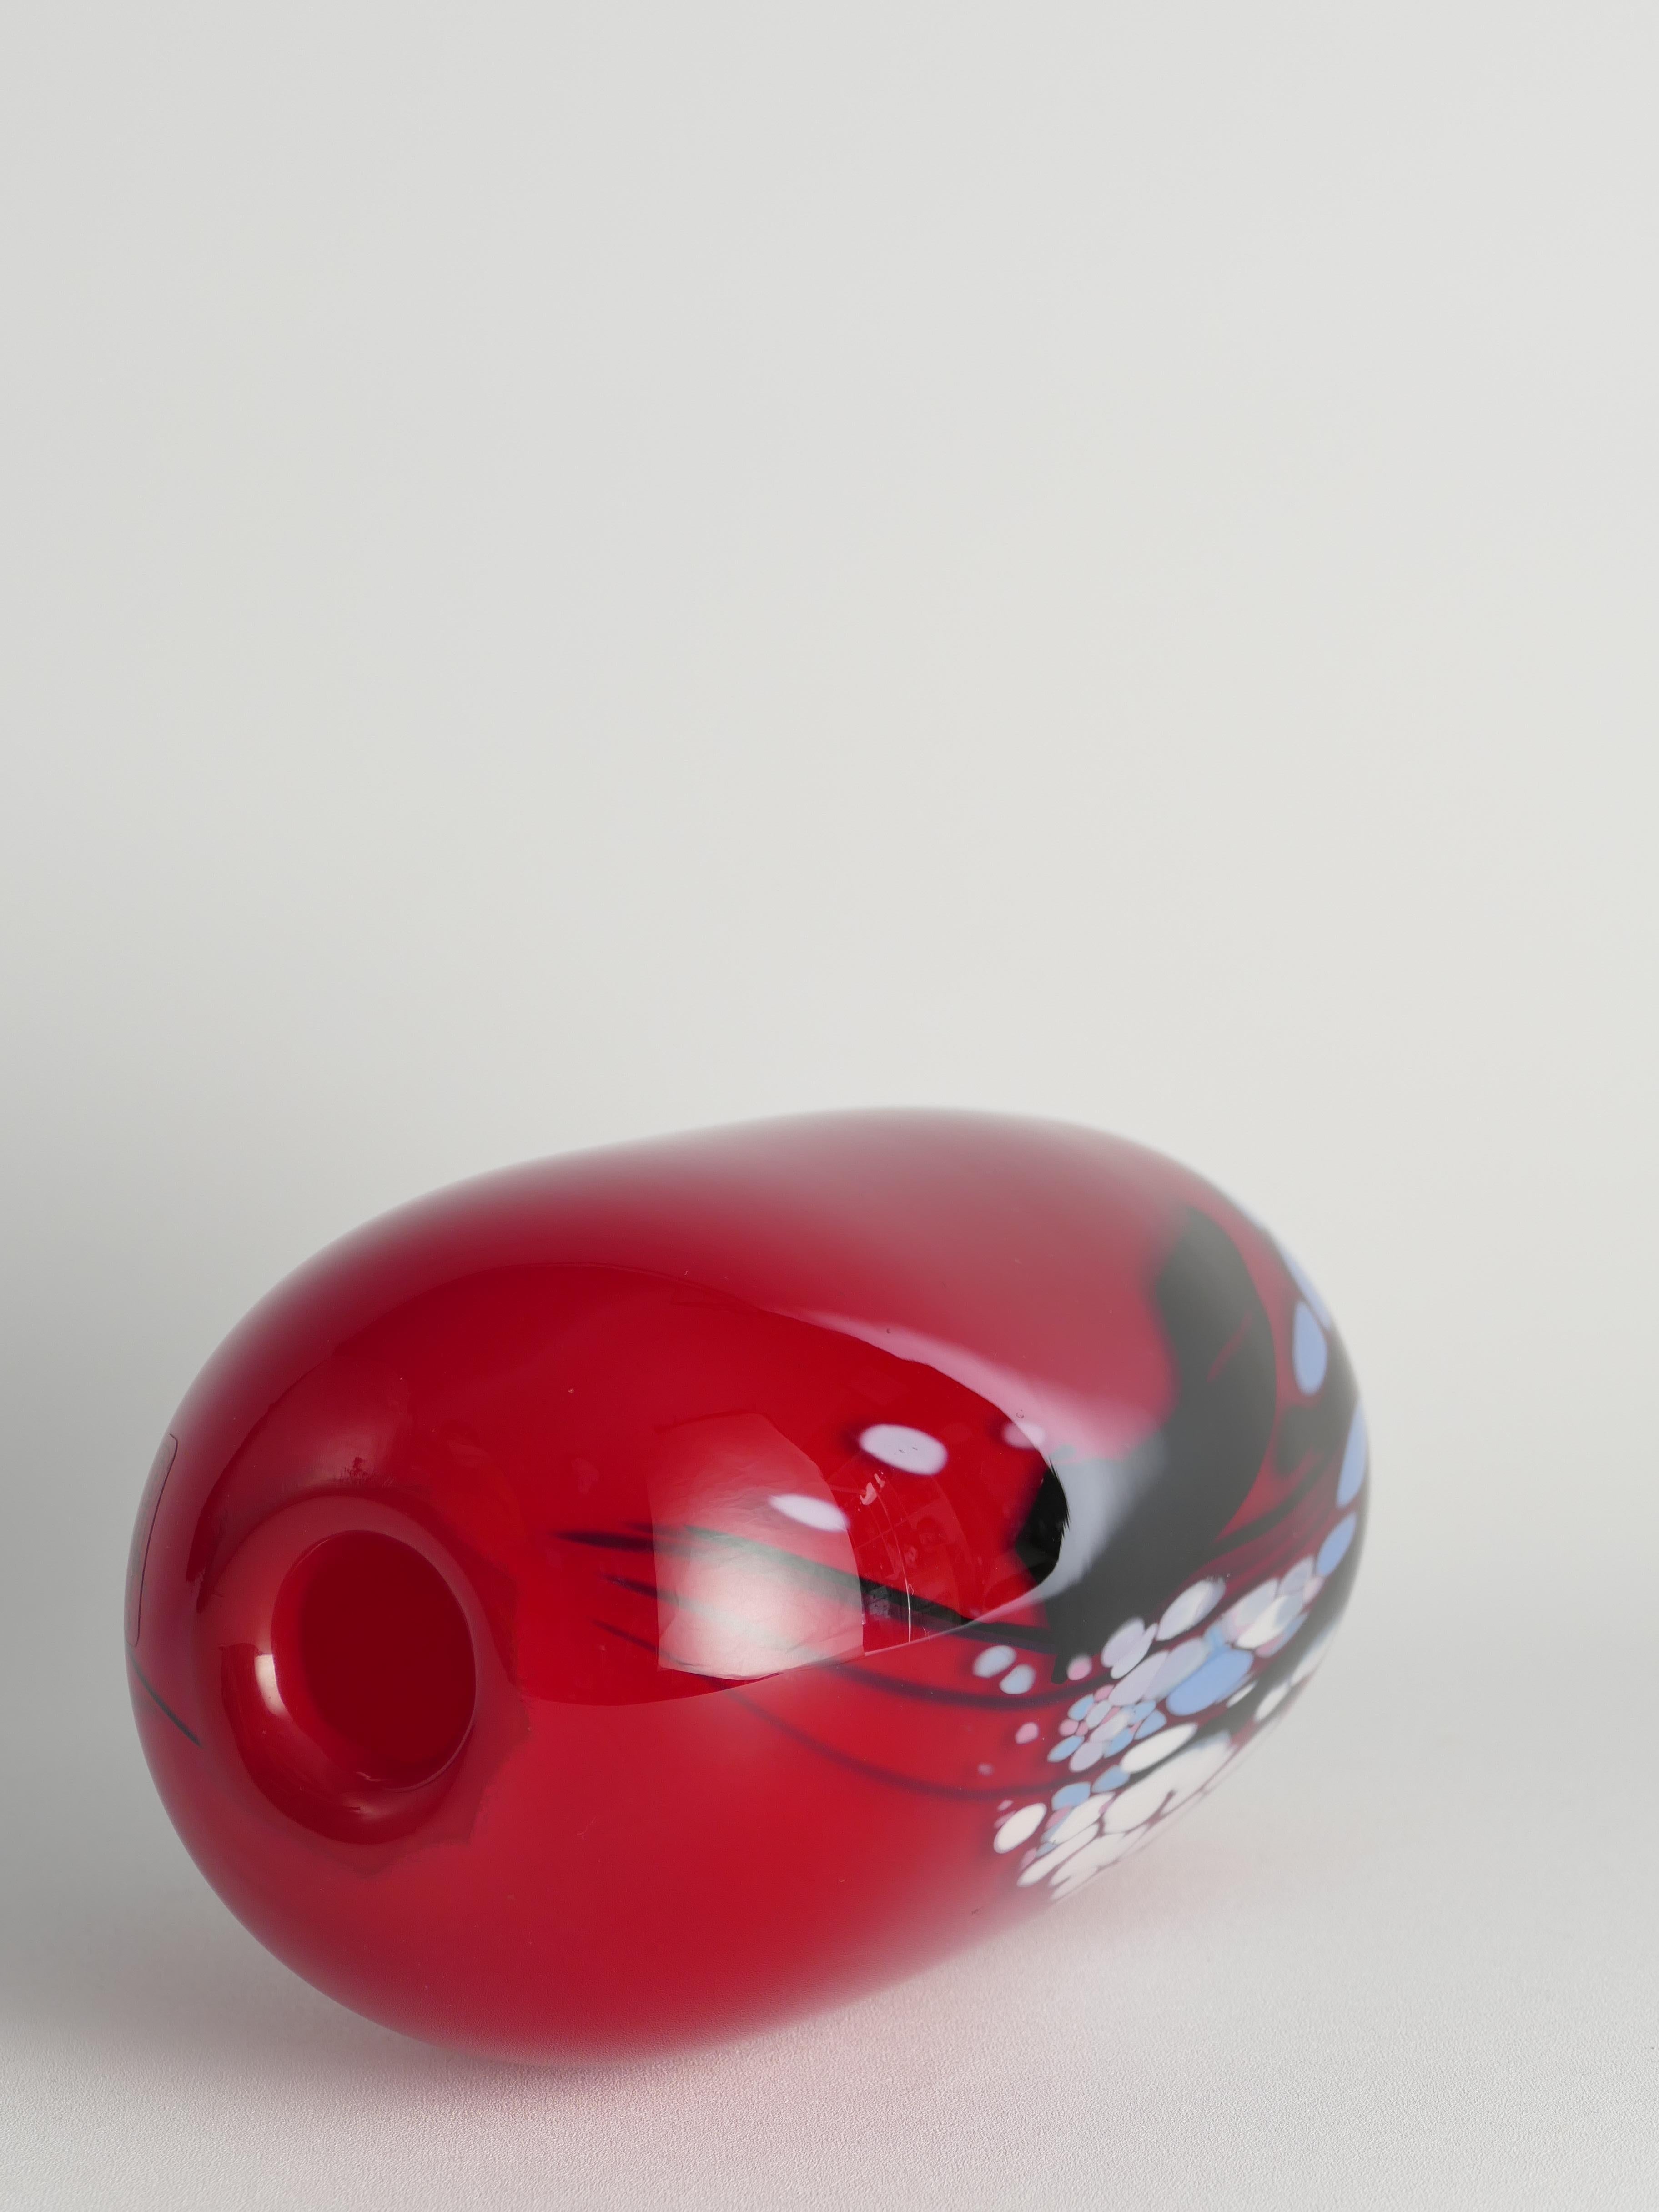 Unique Cherry Red Art Glass Vase by Mikael Axenbrant, Sweden 1990 For Sale 7